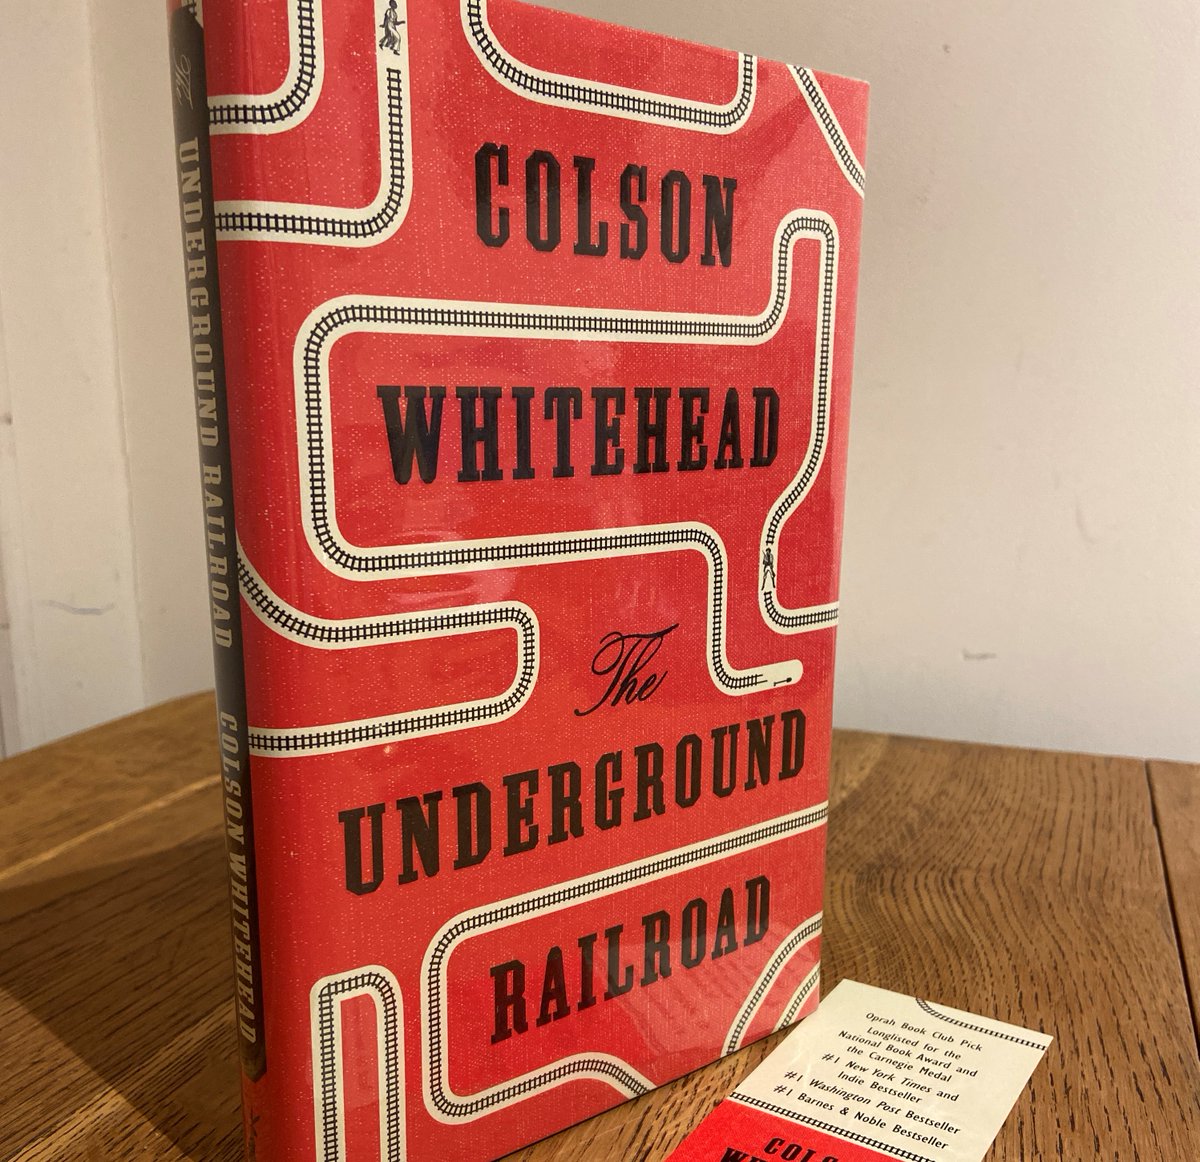 So good it won a Pulitzer Prize. Colson Whitehead’s historical fiction novel is a gripping tale about the secret network of tracks and tunnels that guided escaped slaves to freedom. Whitehead brilliantly re-creates the terrors of the antebellum era. bddy.me/40oxE58